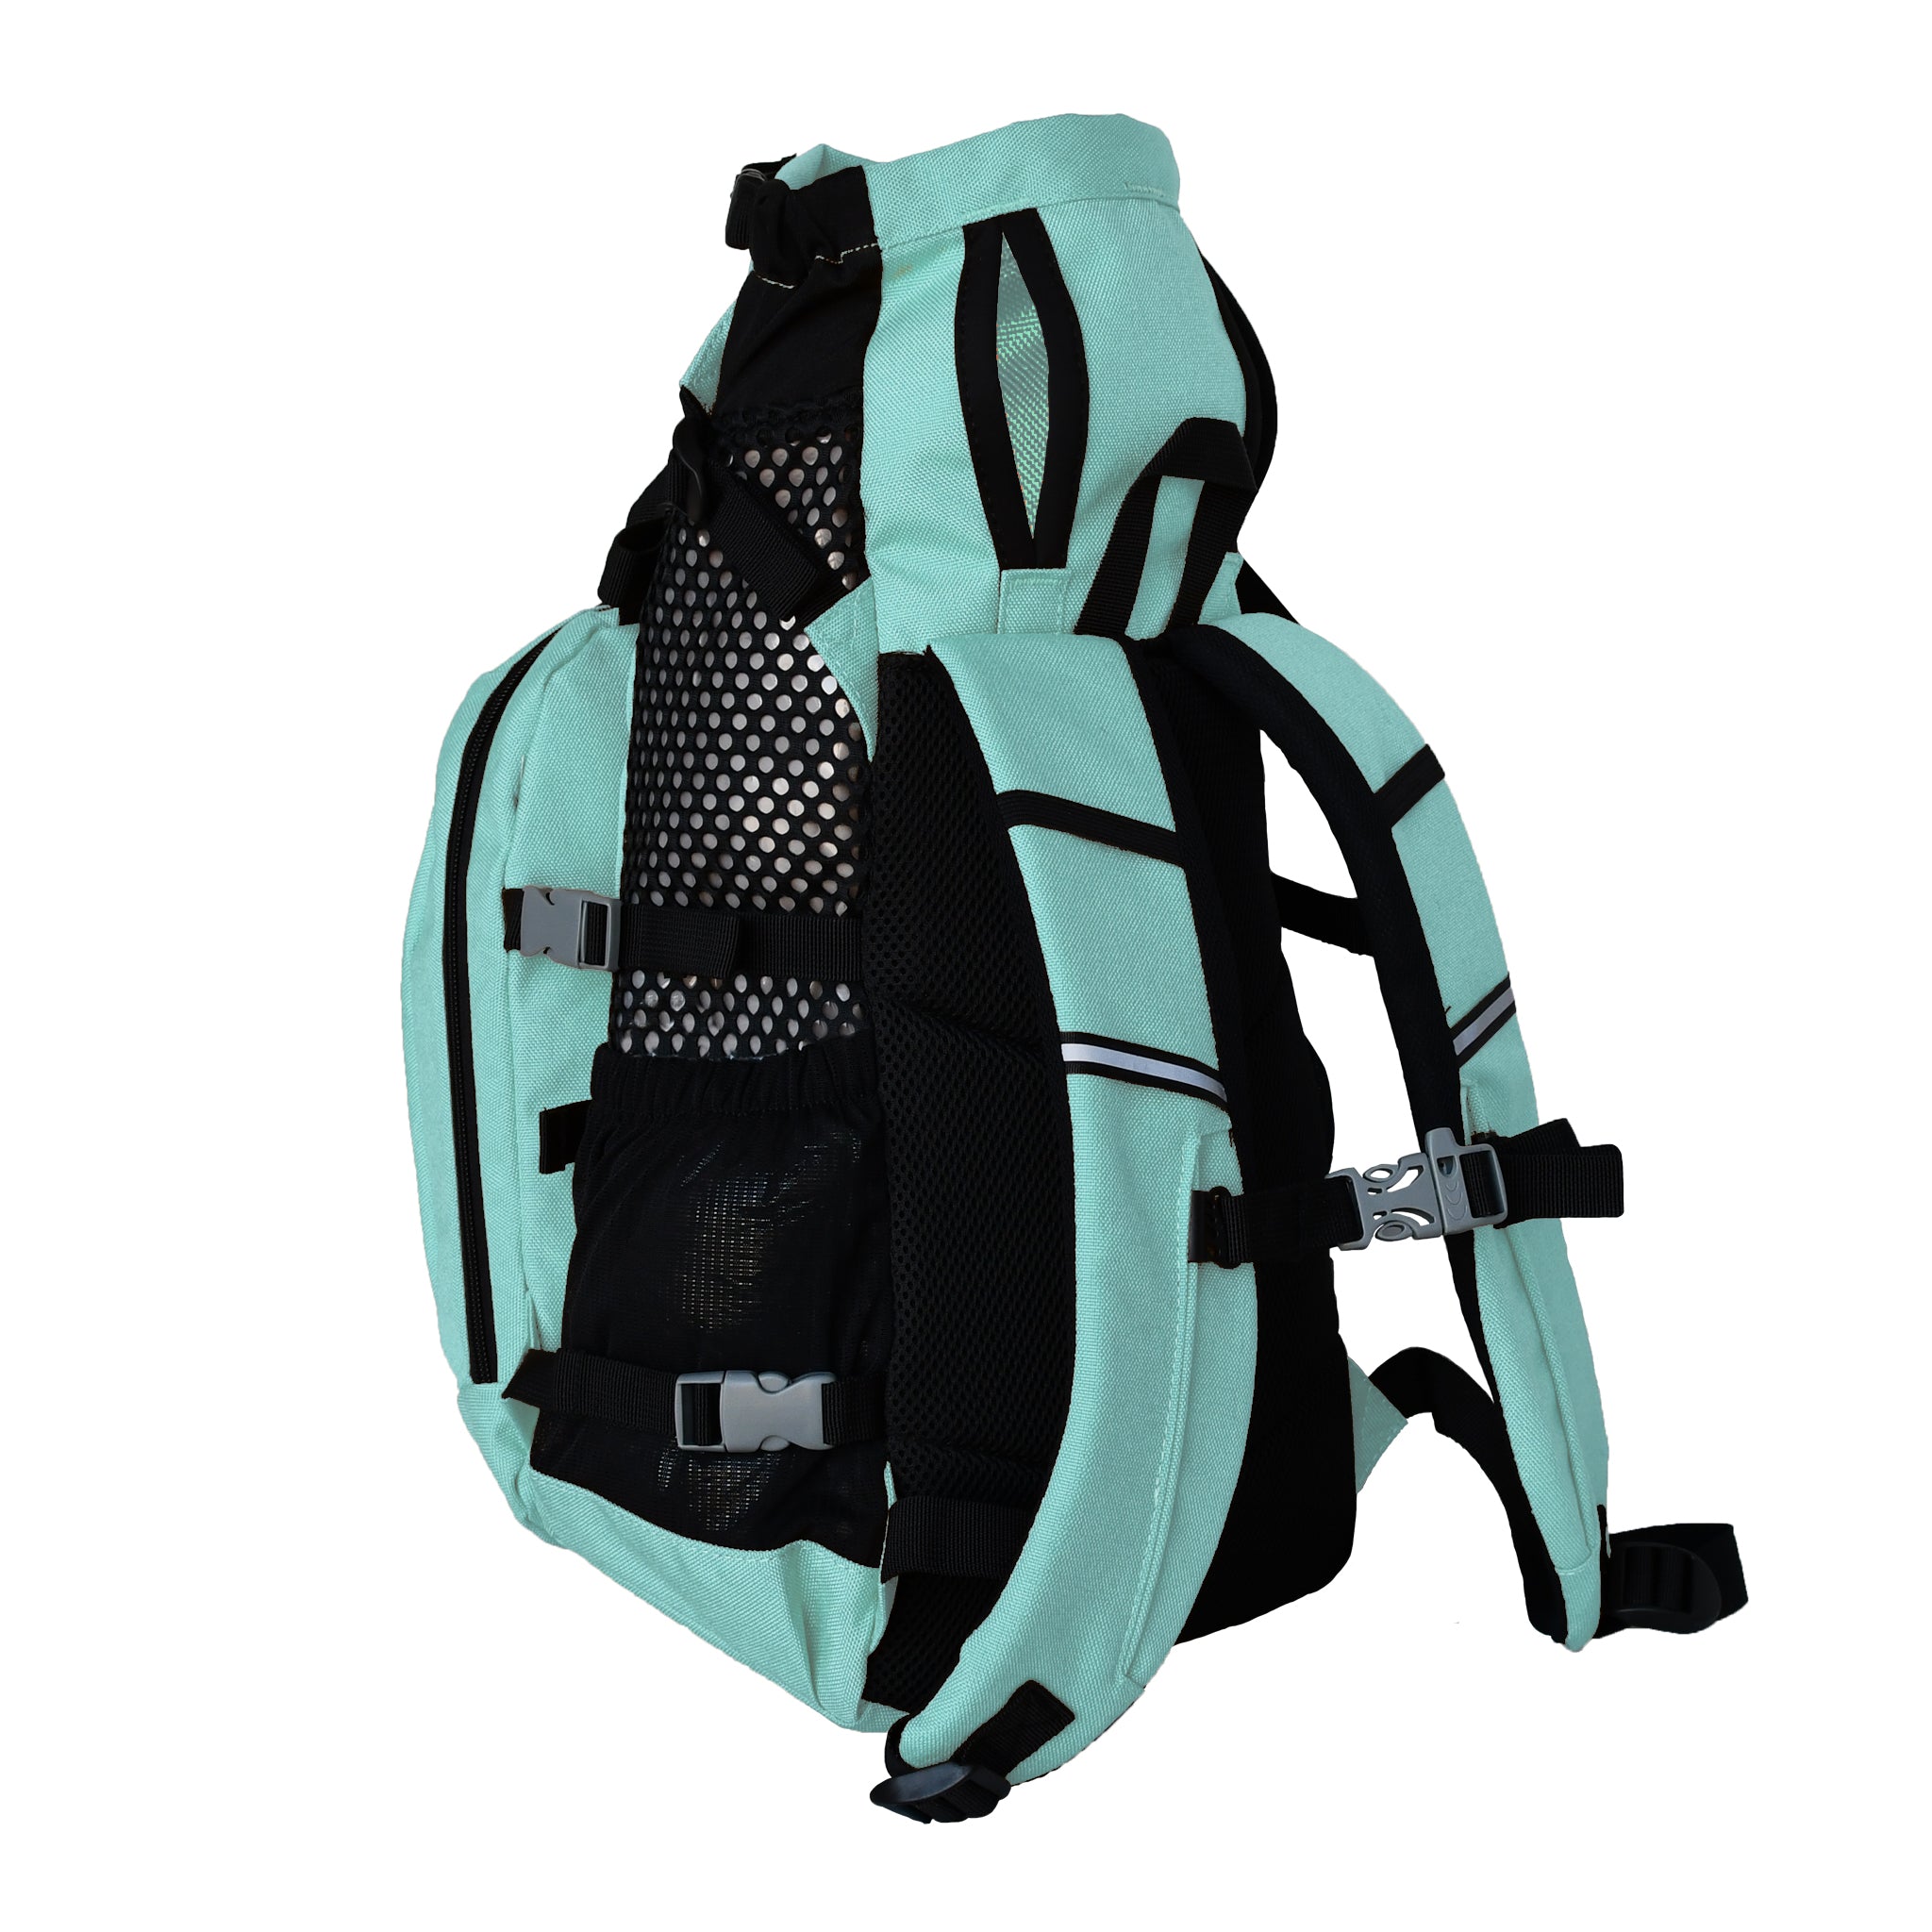 Klearance Plus 2 Mint Angled Straps